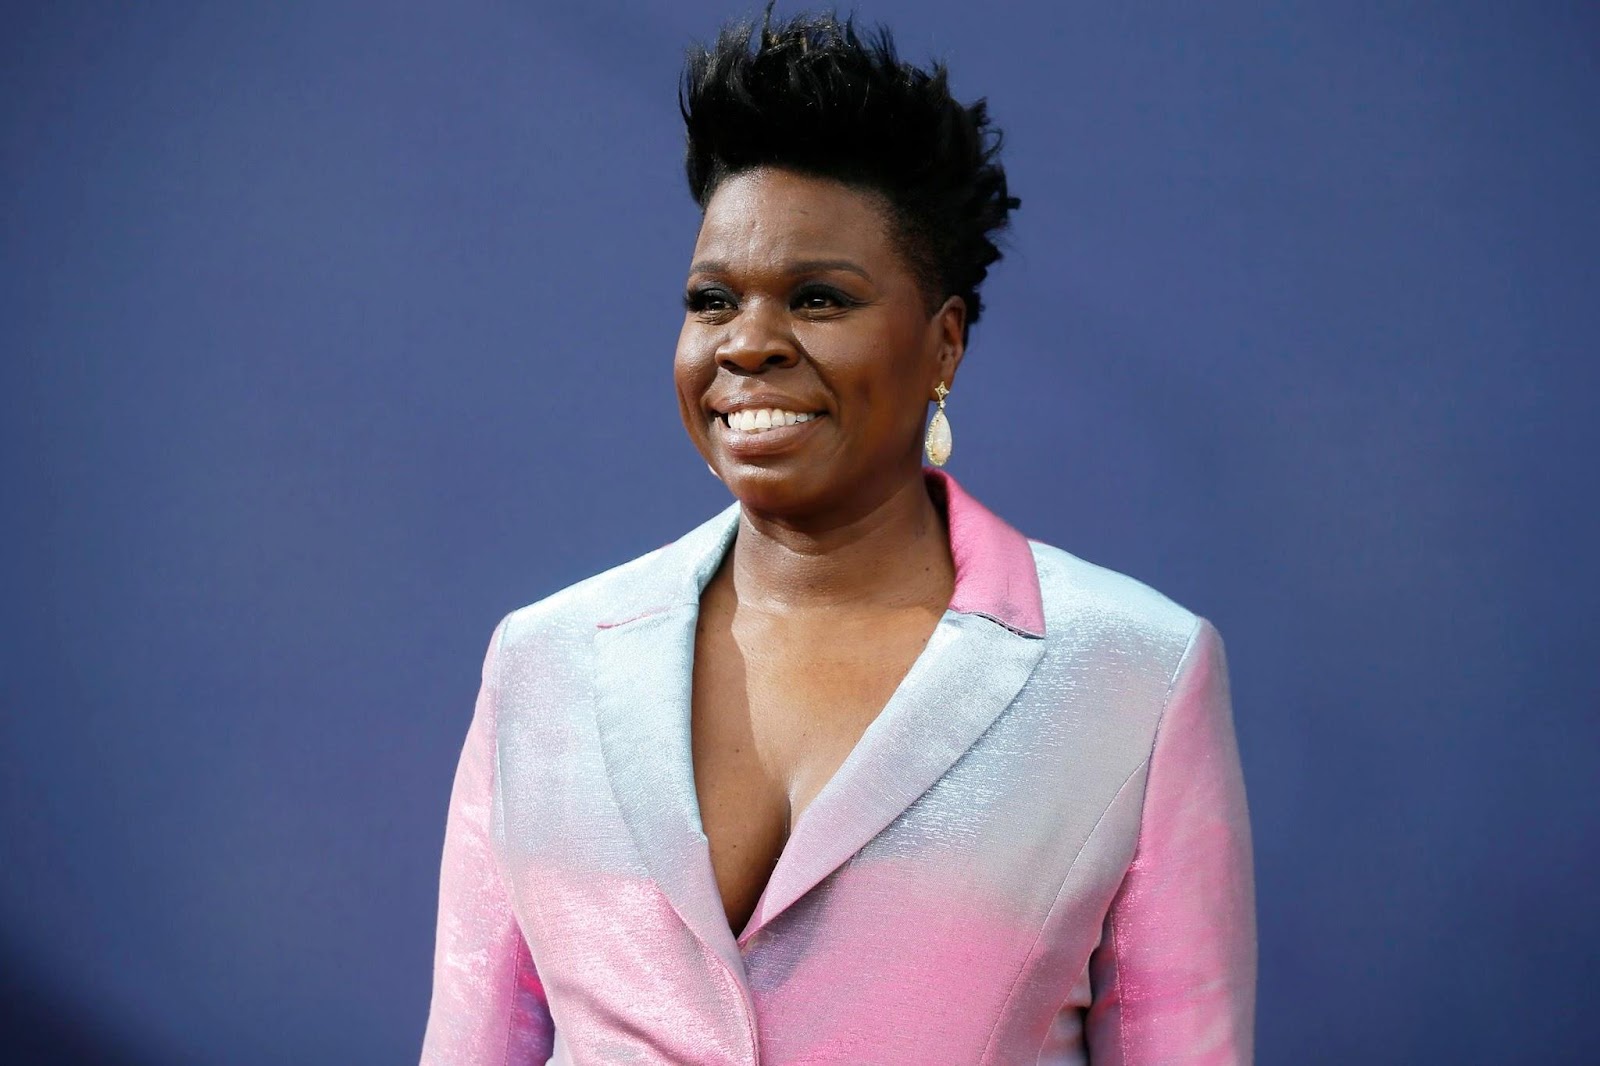 After ‘SNL’, Does Leslie Jones Still Worth The Same? - Top 10 Celebrities’ TV Show Net Worth In America